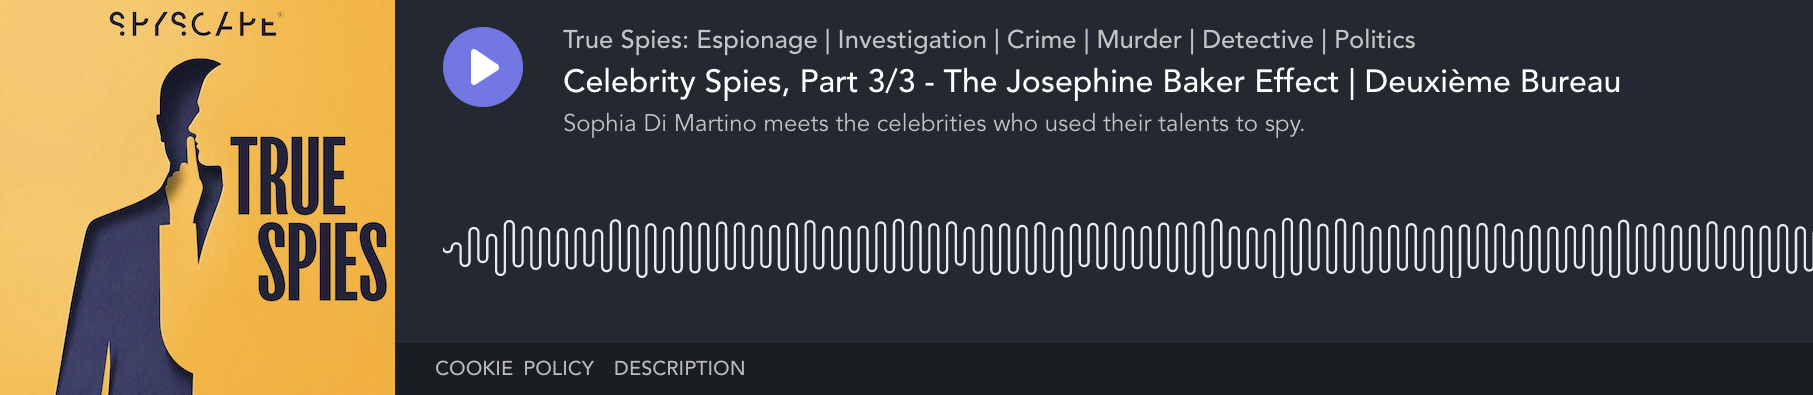 The Josephine Baker Effect, True Spies podcast